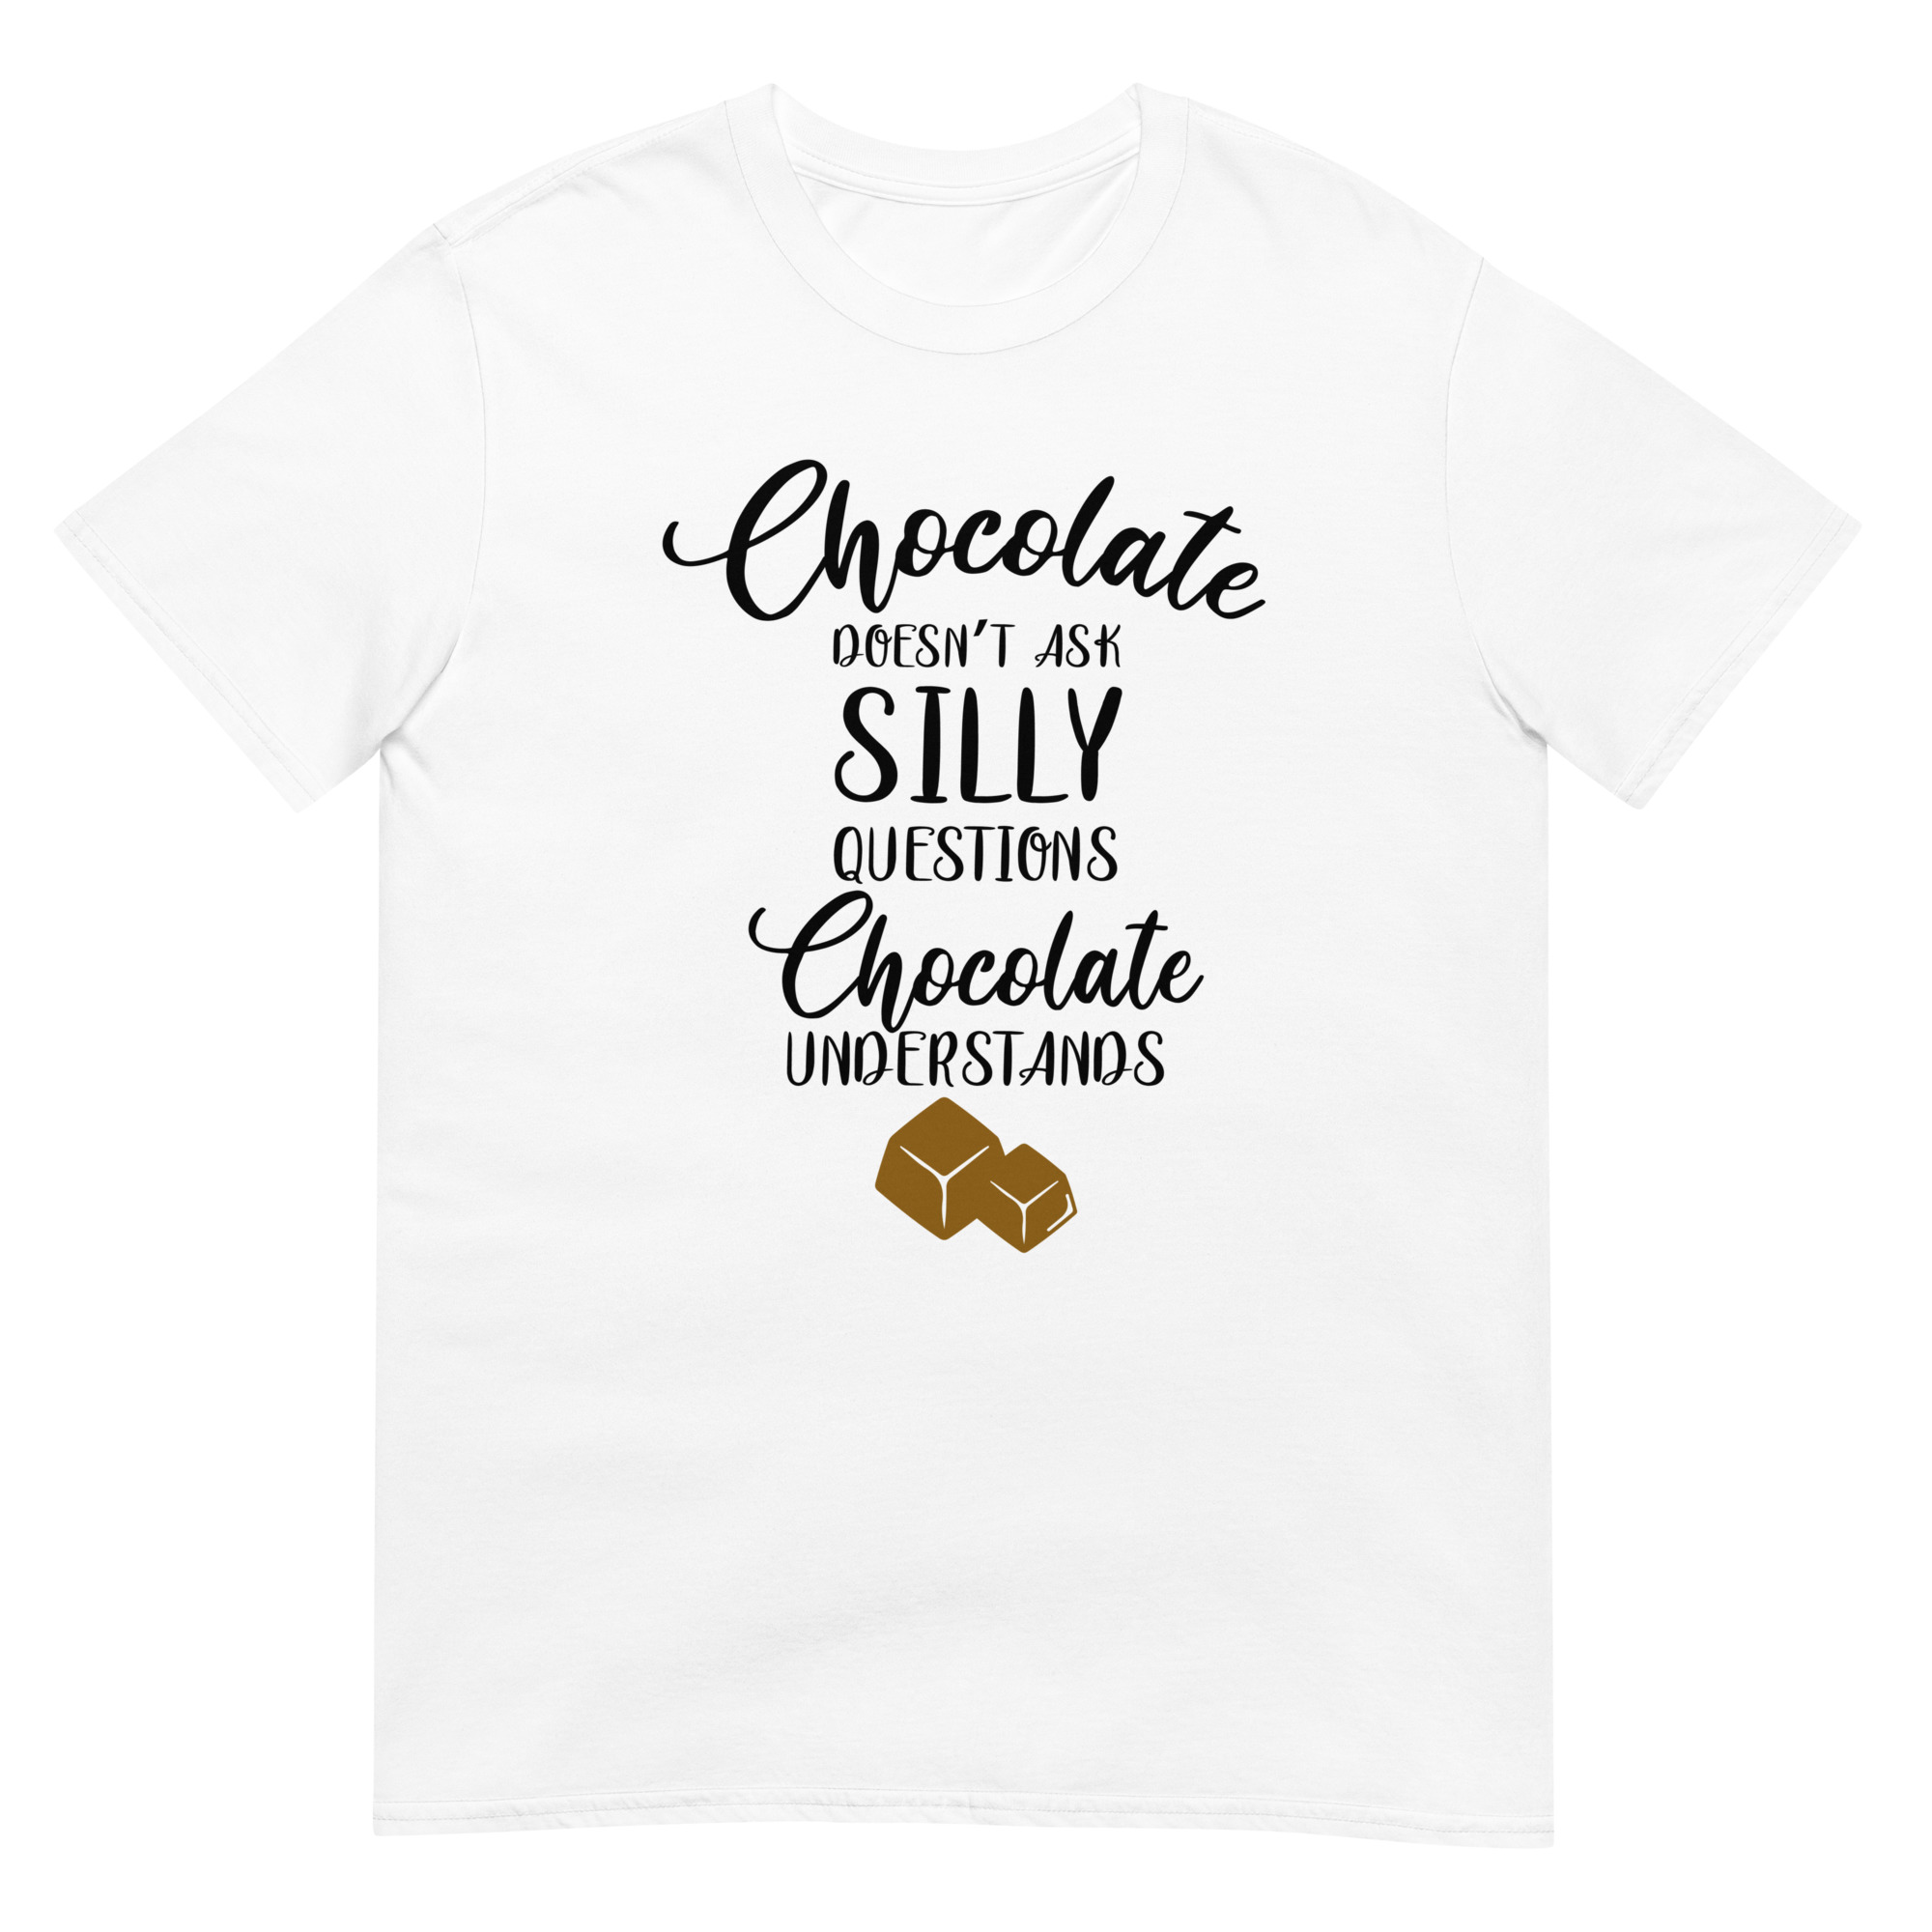 Chocolate Doesn't Ask Silly Questions Chocolate Understands - Unsiex Love T-Shirt